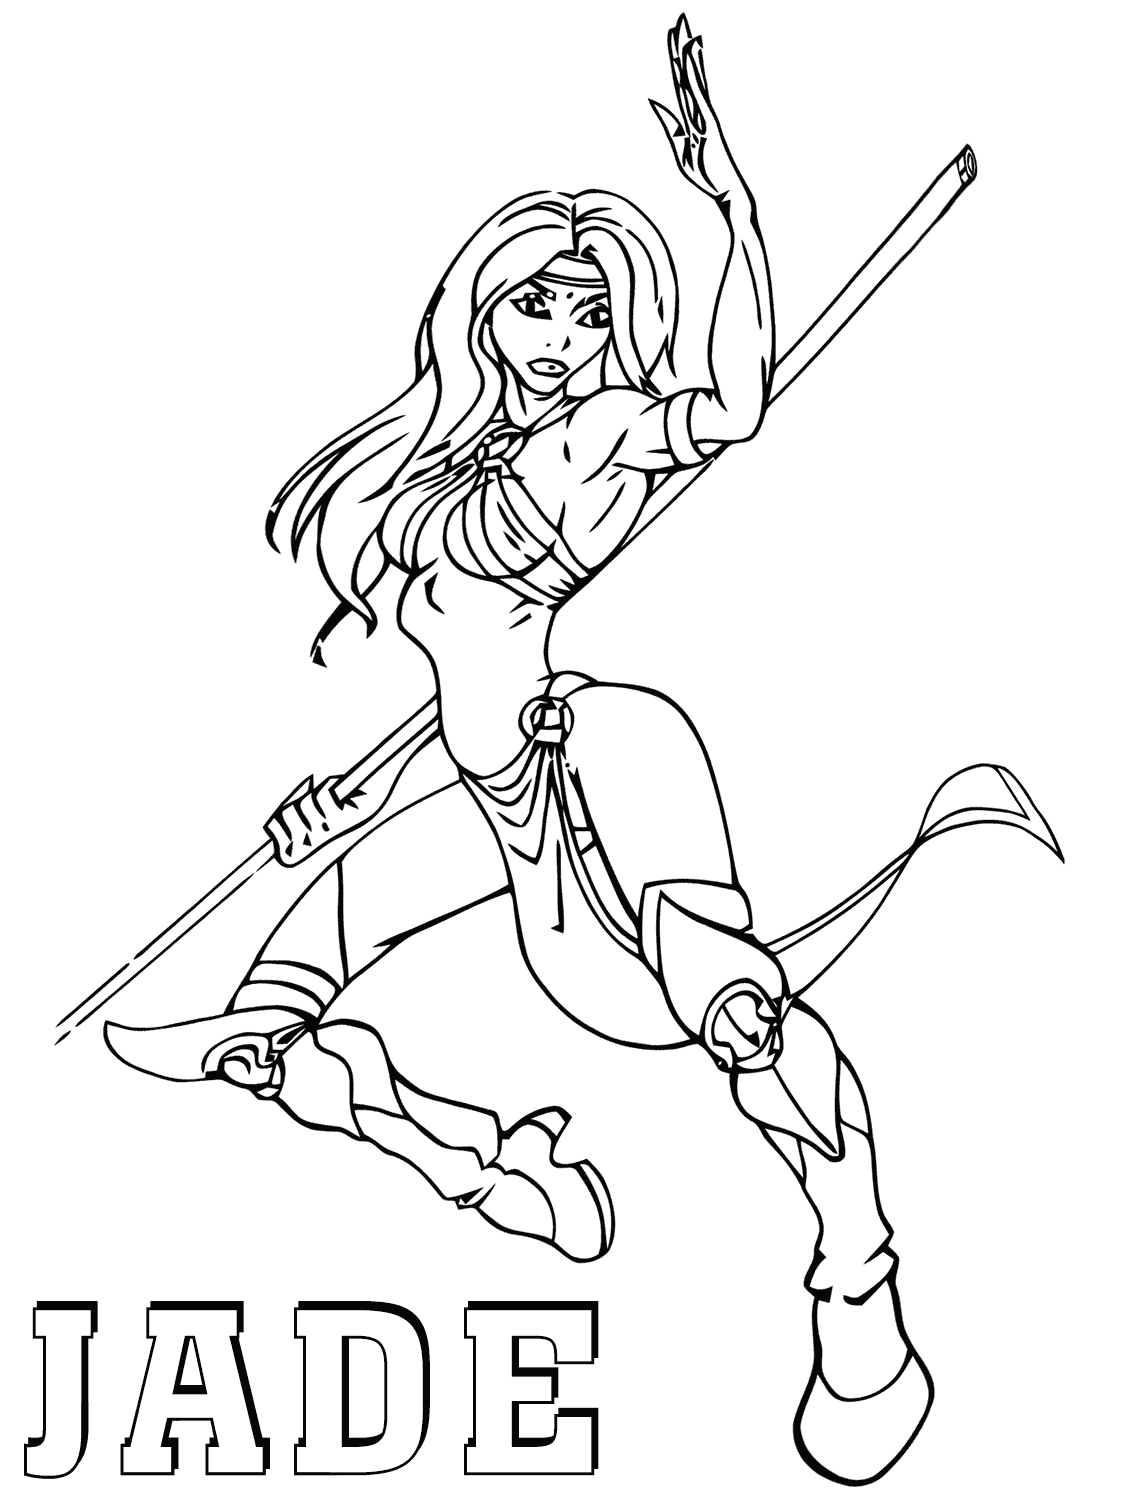 Mortal Kombat coloring pages | Coloring pages to download and print